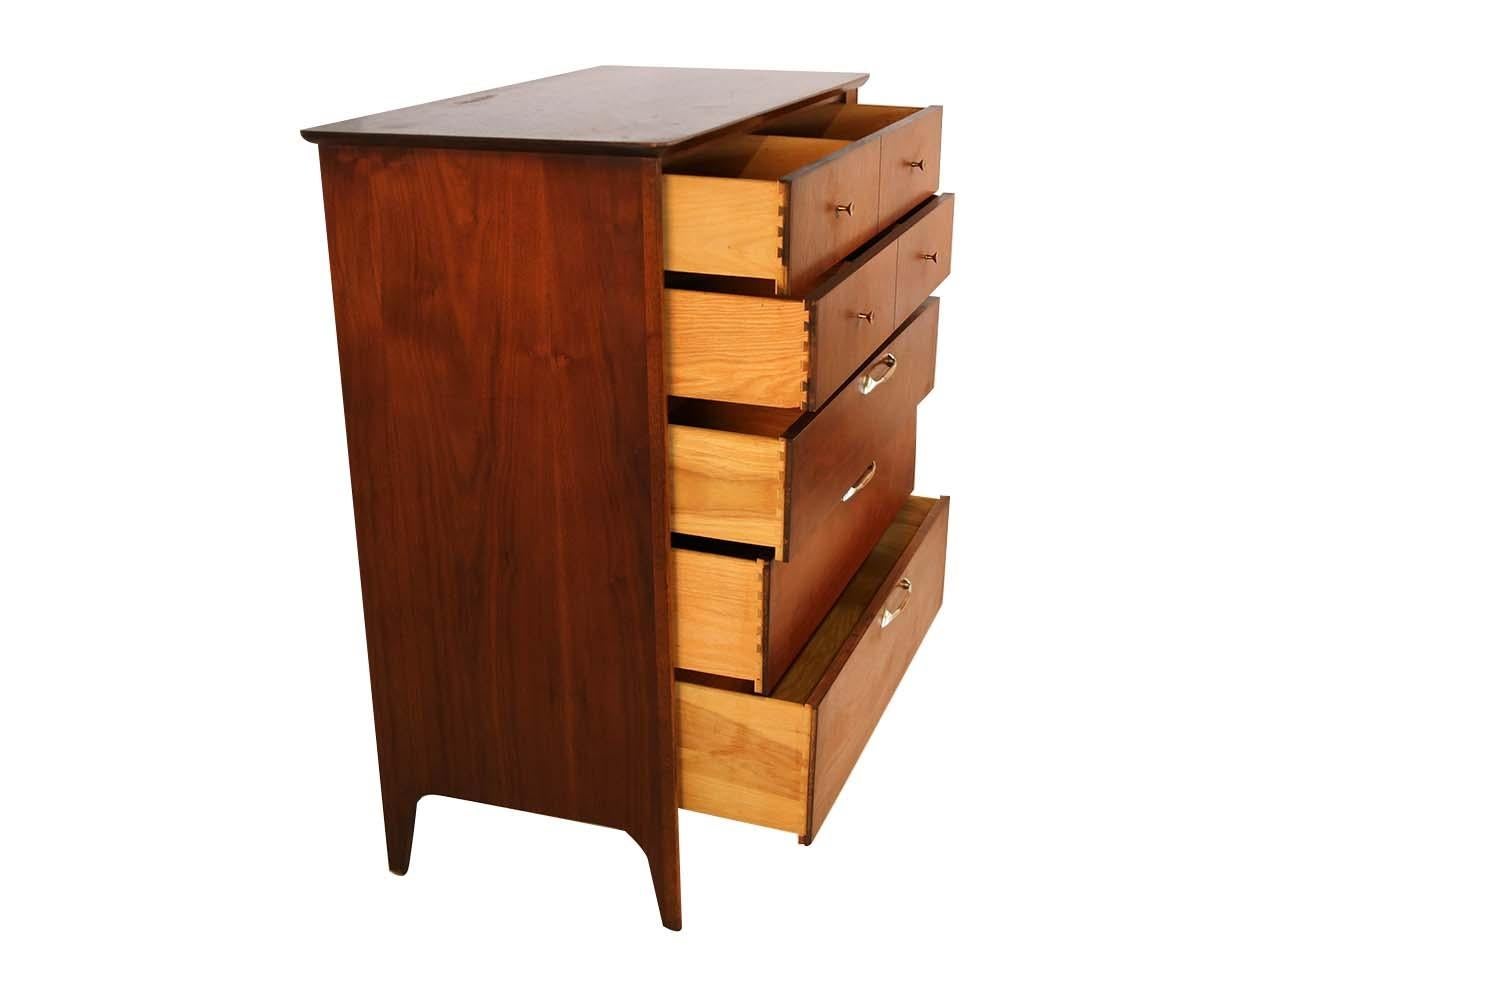 A gorgeous, walnut midcentury, tall, highboy dresser / chest by Drexel, in nearly pristine condition. Minimalist Danish modern inspired profile, with exceptional construction and style. Features five dovetailed drawers with brass pulls, and painted